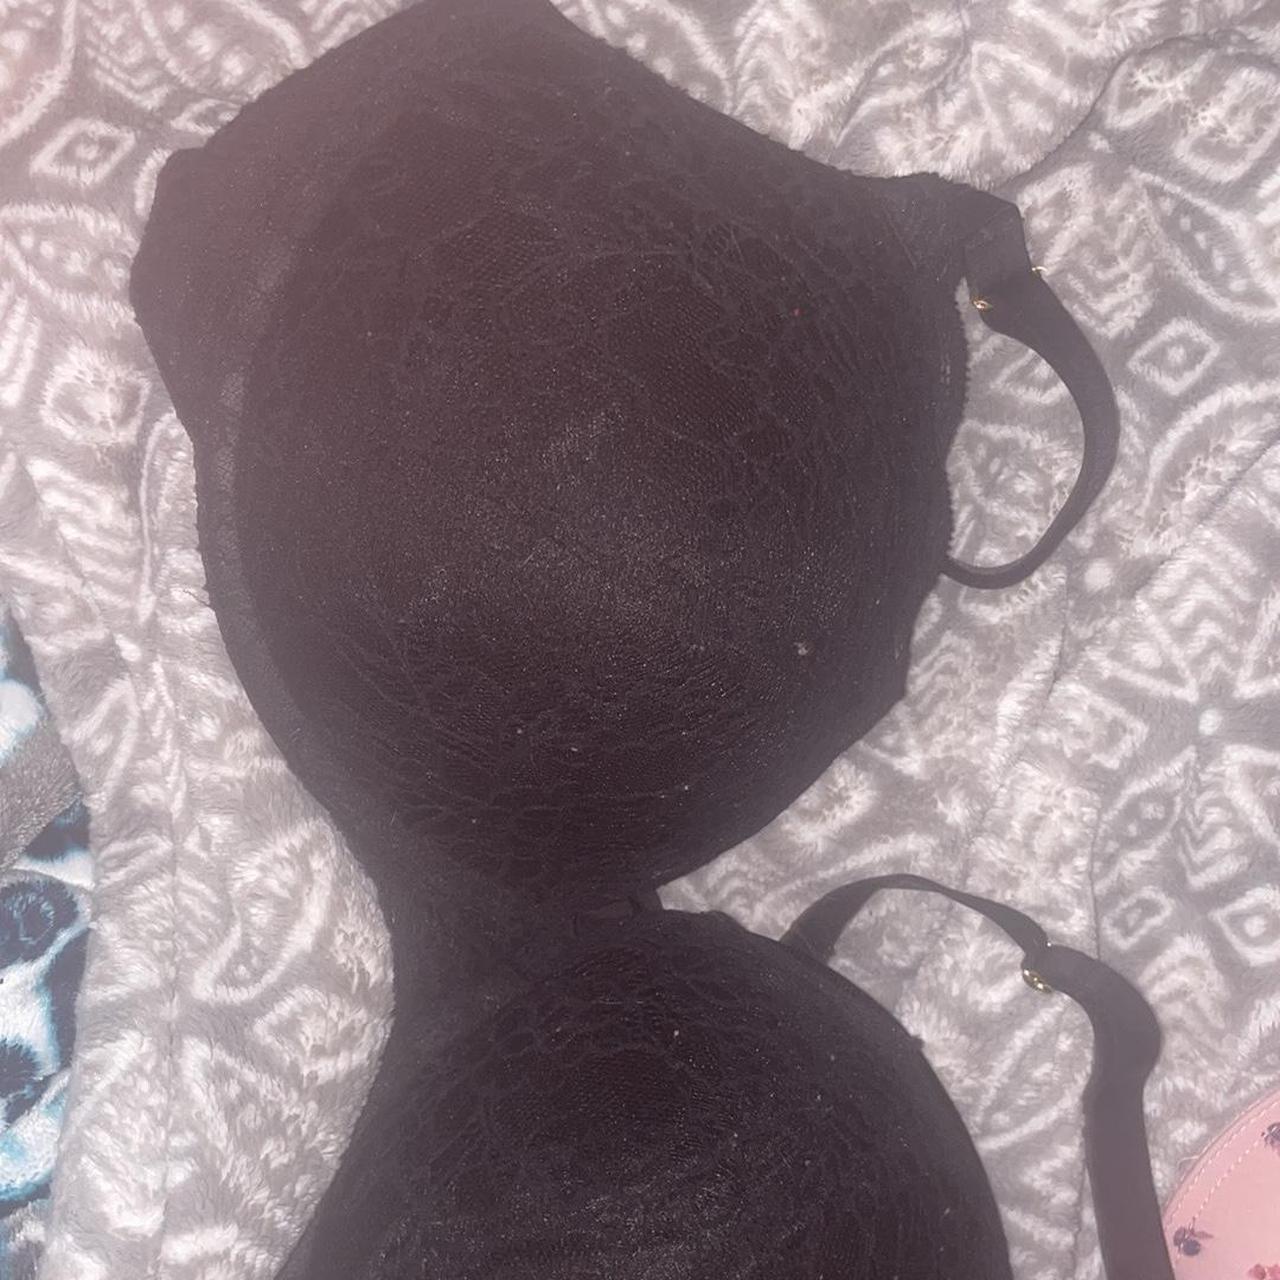 blue bras and things bra size 12c. brand new - Depop